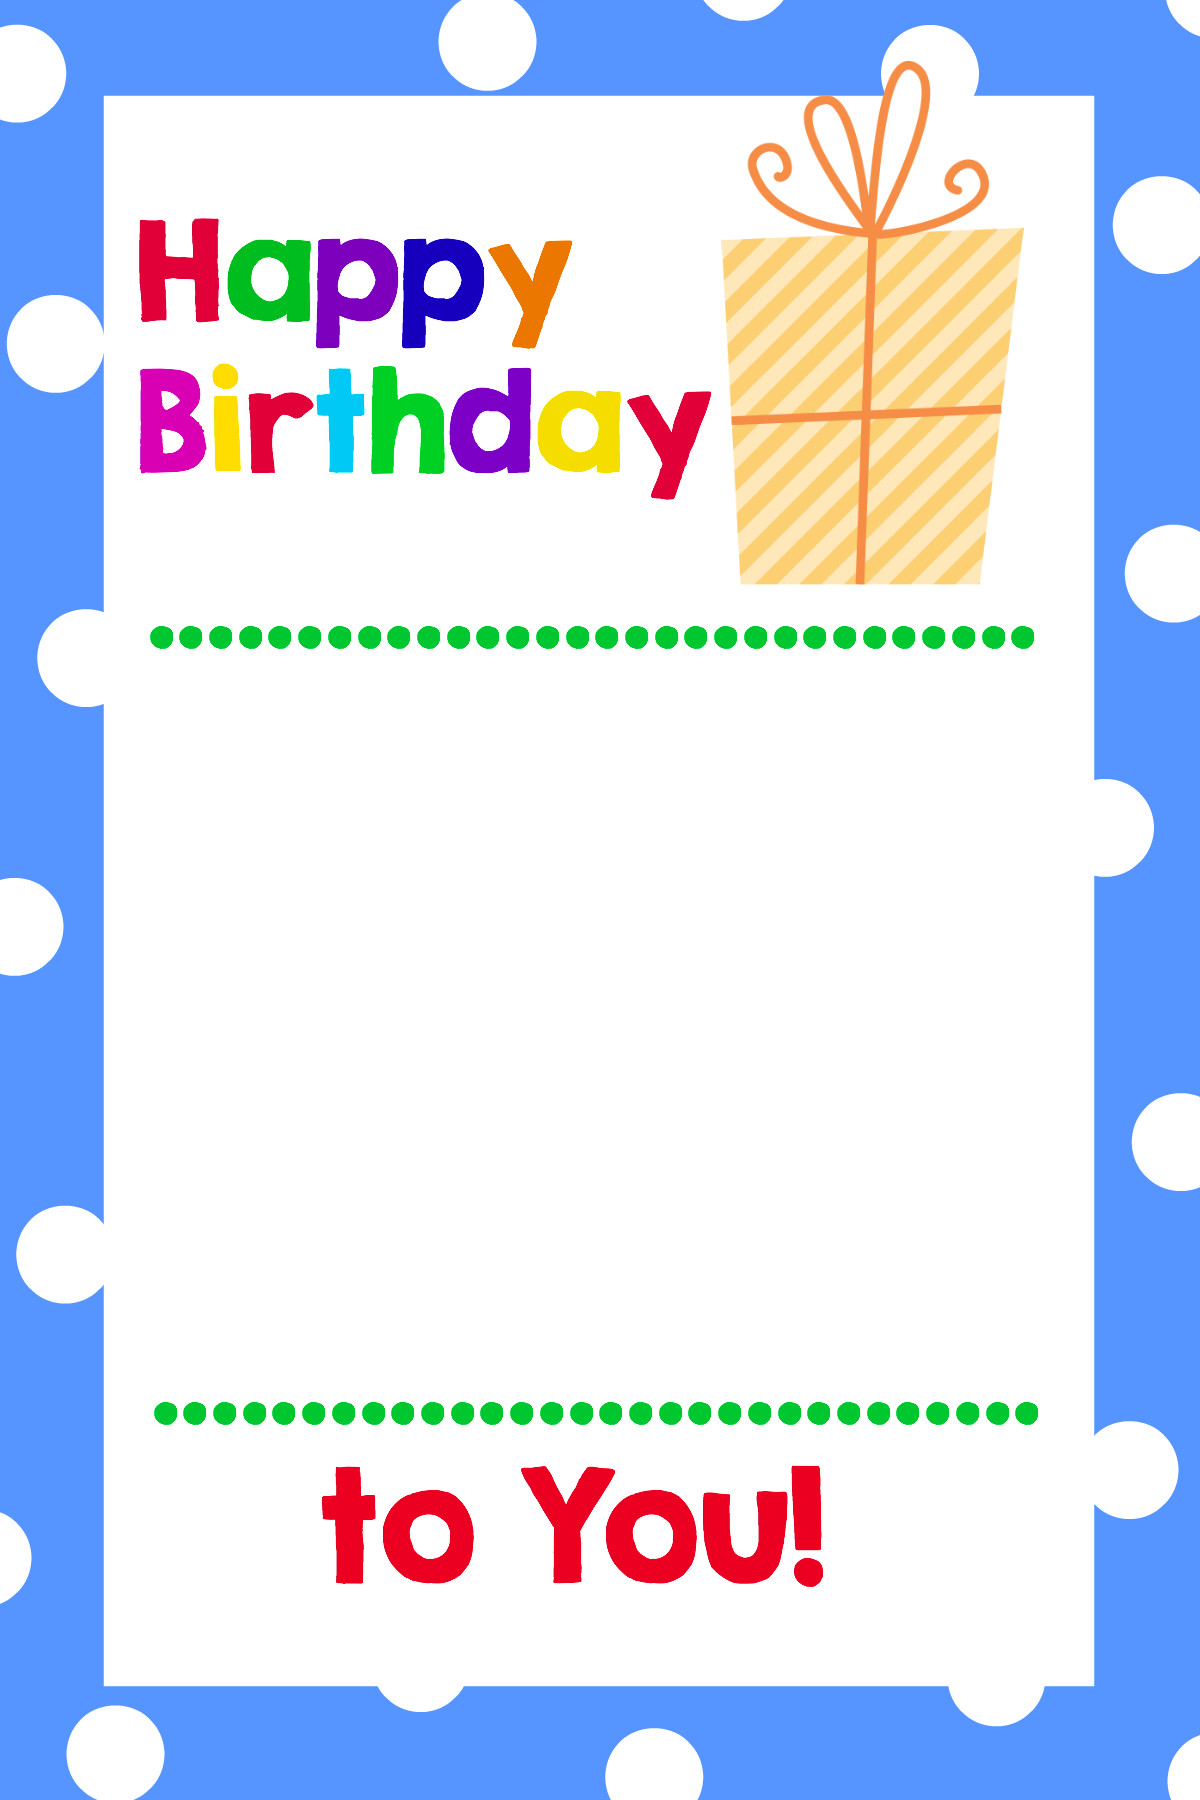 Free Gifts On Birthday
 Free Printable Birthday Cards That Hold Gift Cards